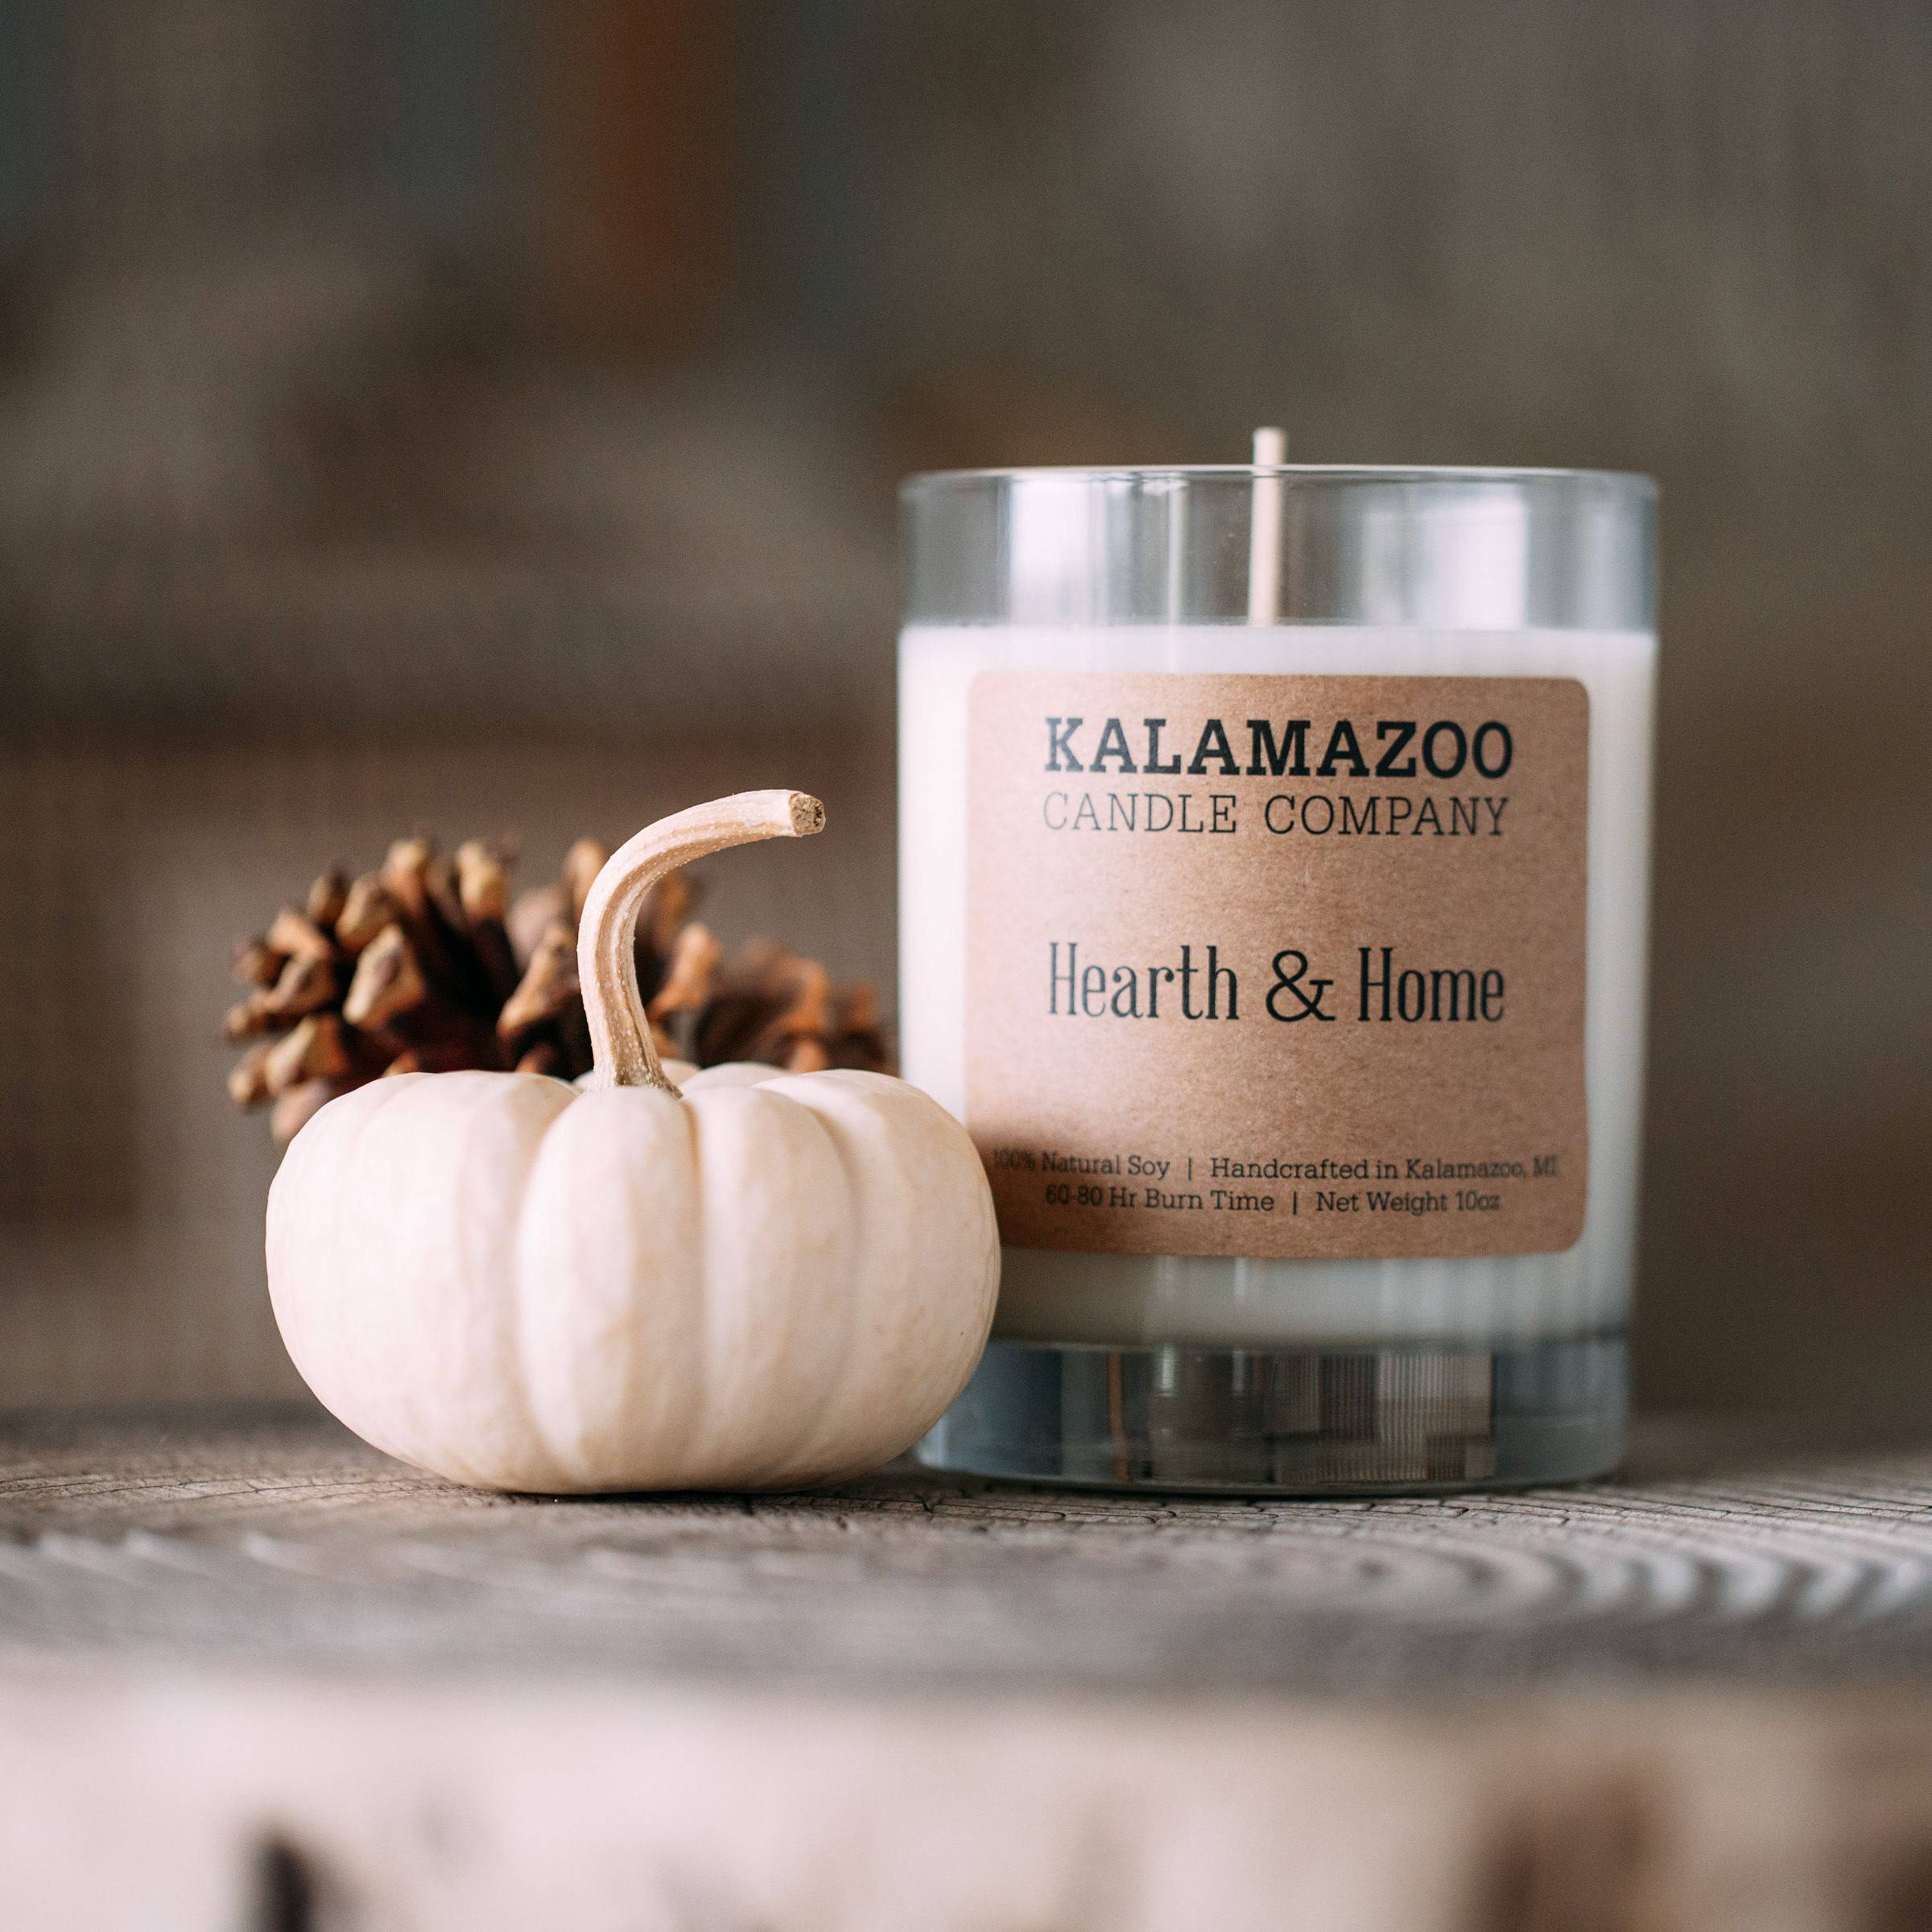 Hearth and Home natural soy wax scented candle